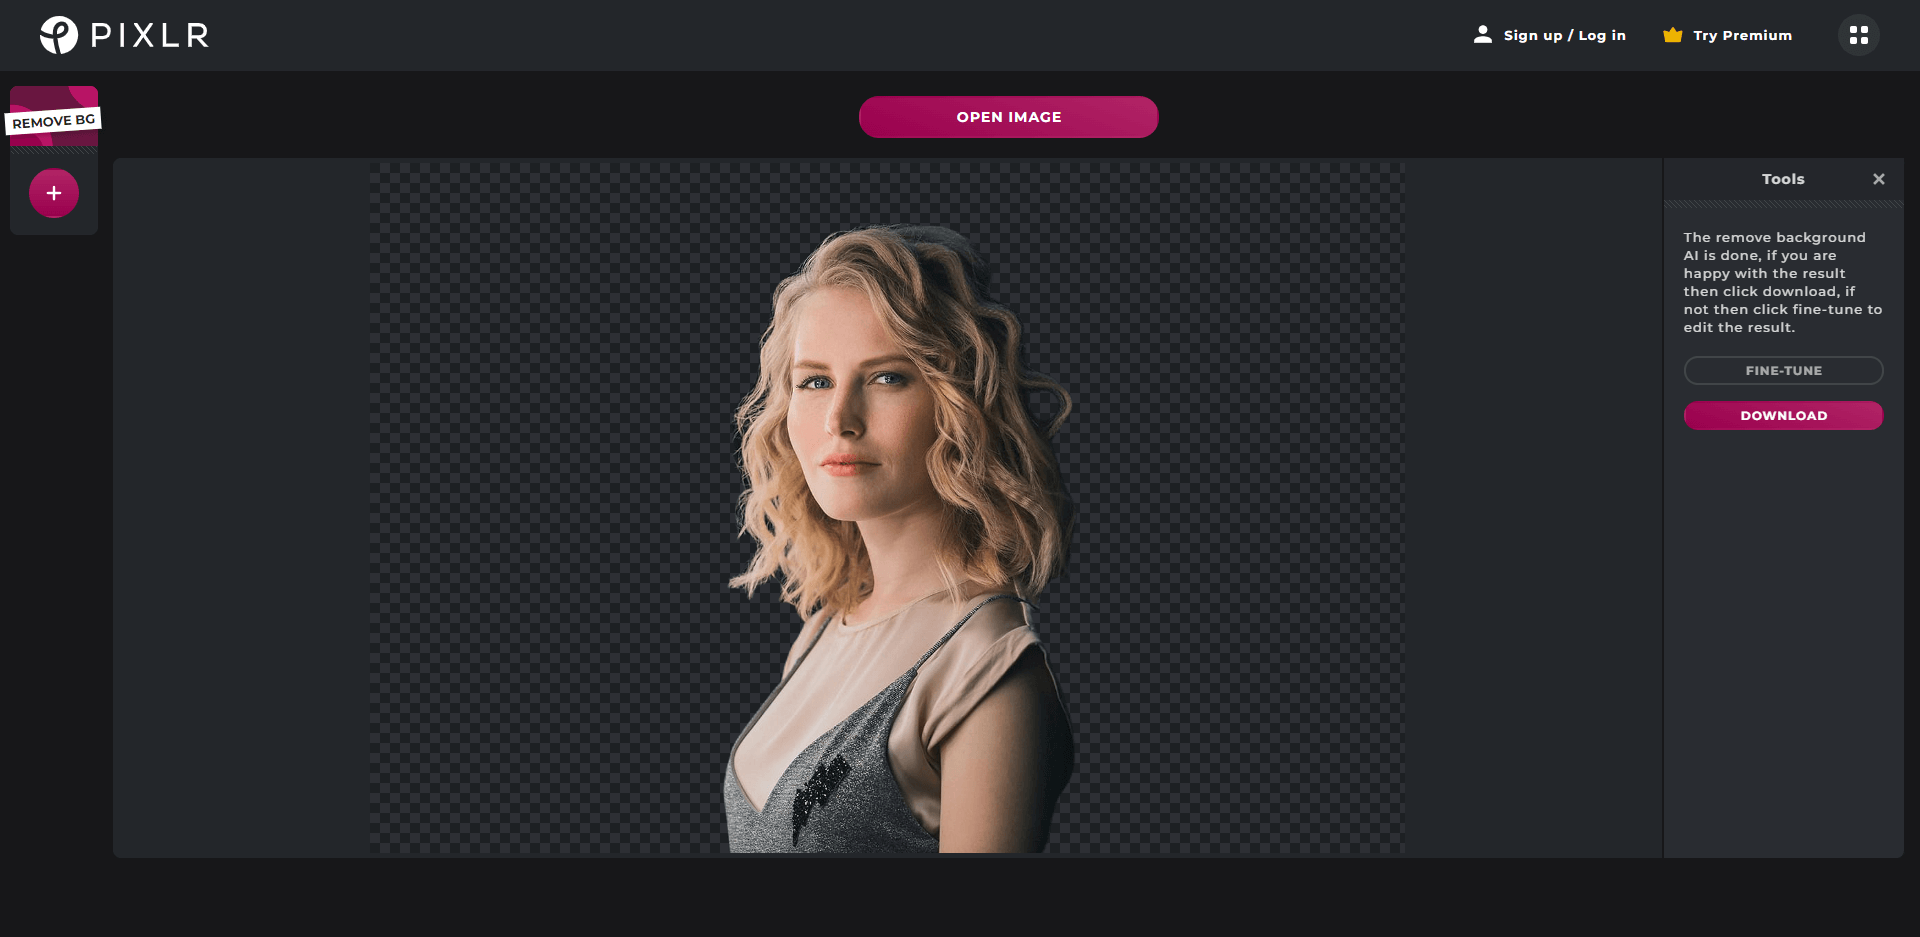 Pixlr offers a specific photo background removal service